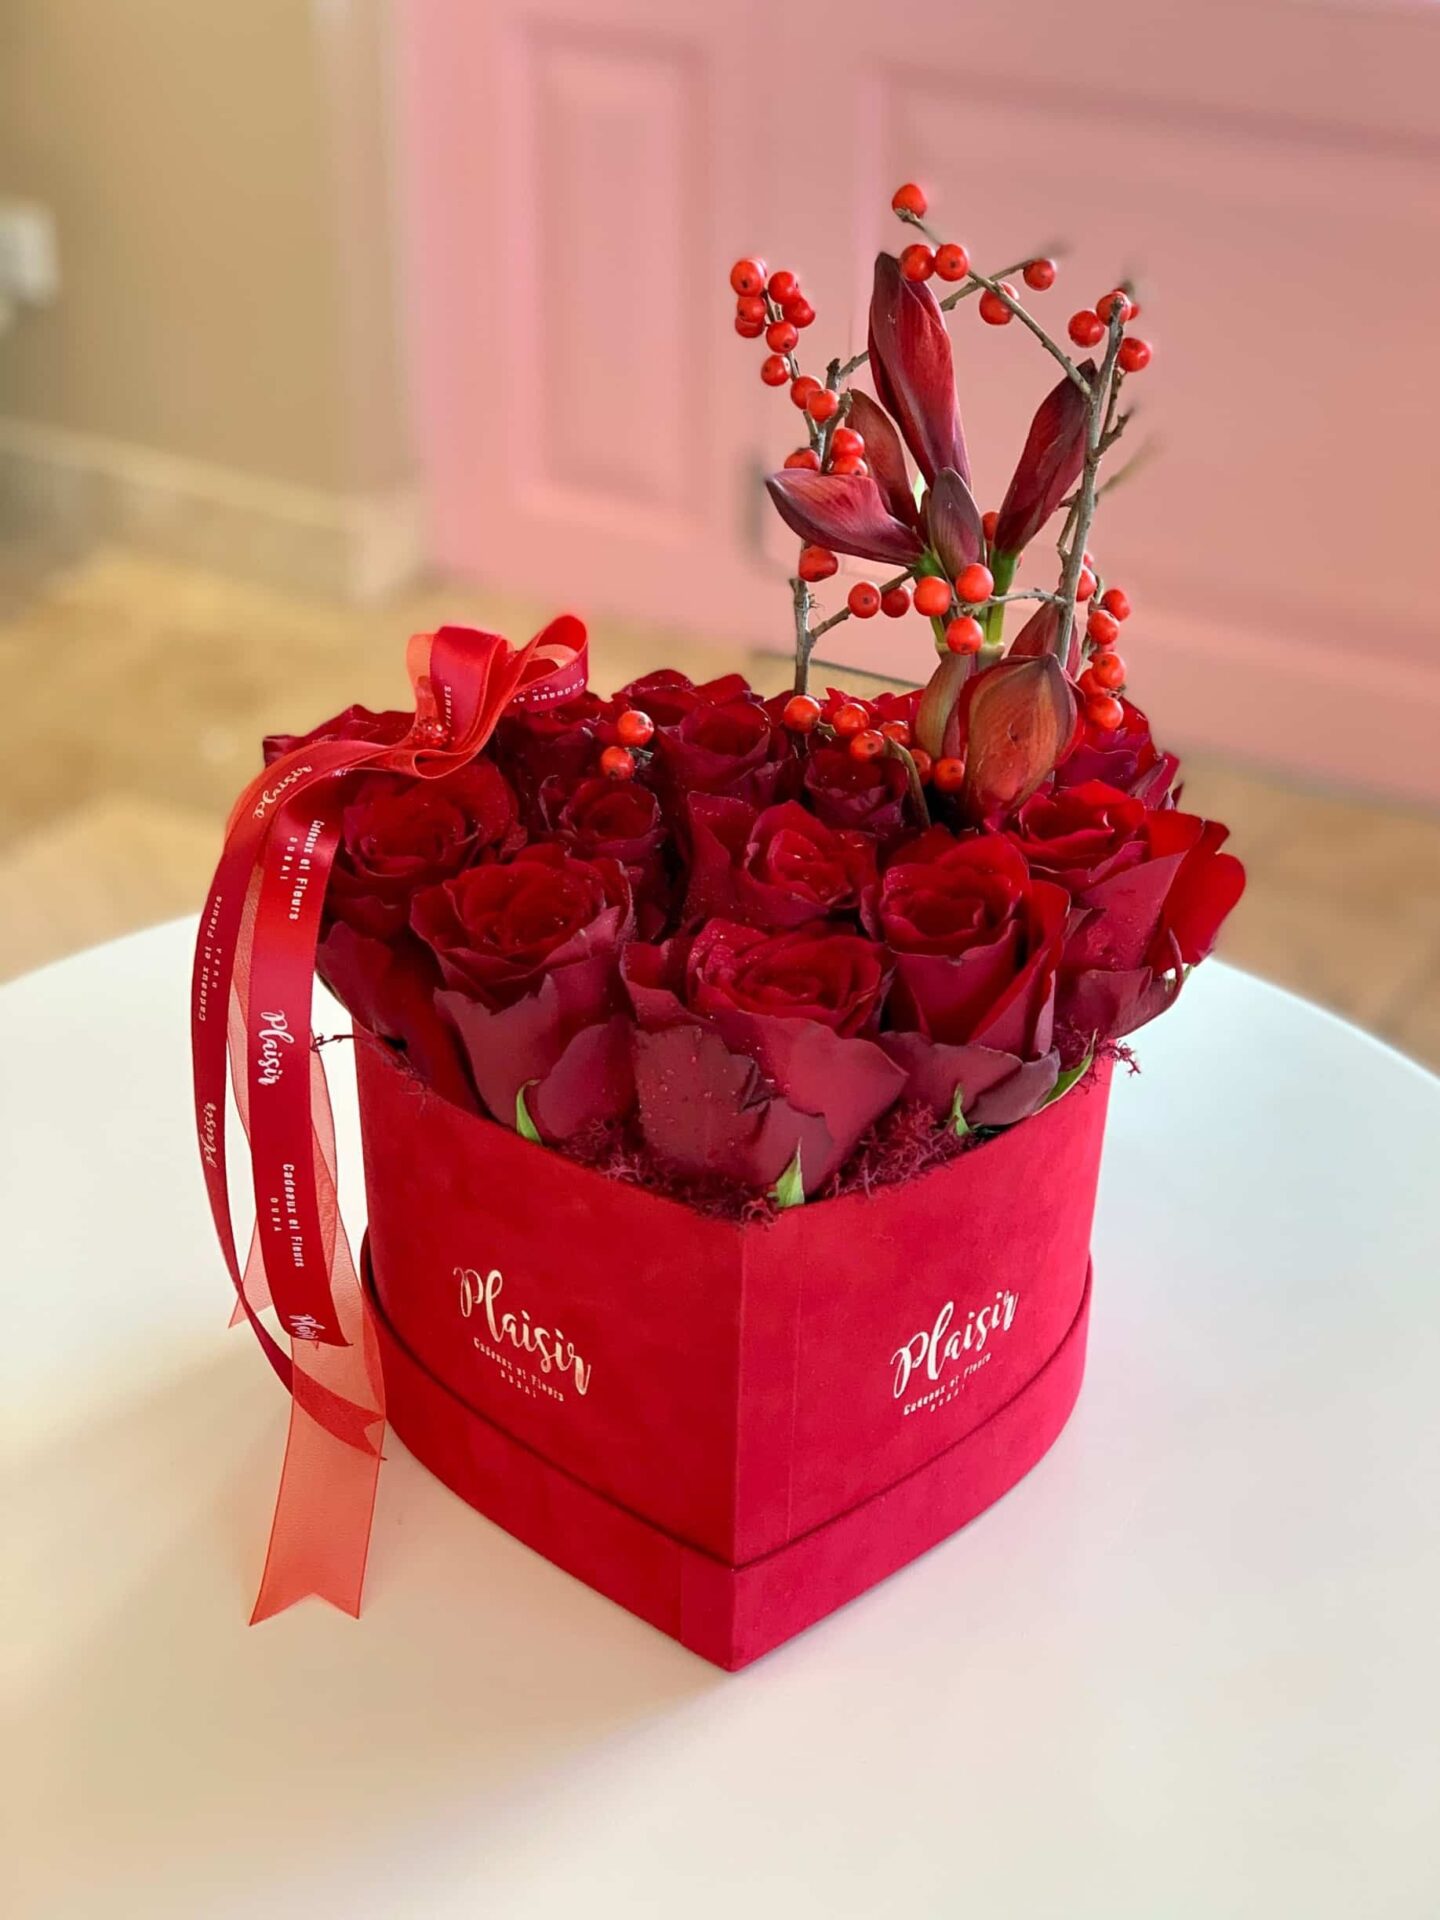 Flowers Gift Ideas for Valentine’s Day | Plaisir Cadeaux